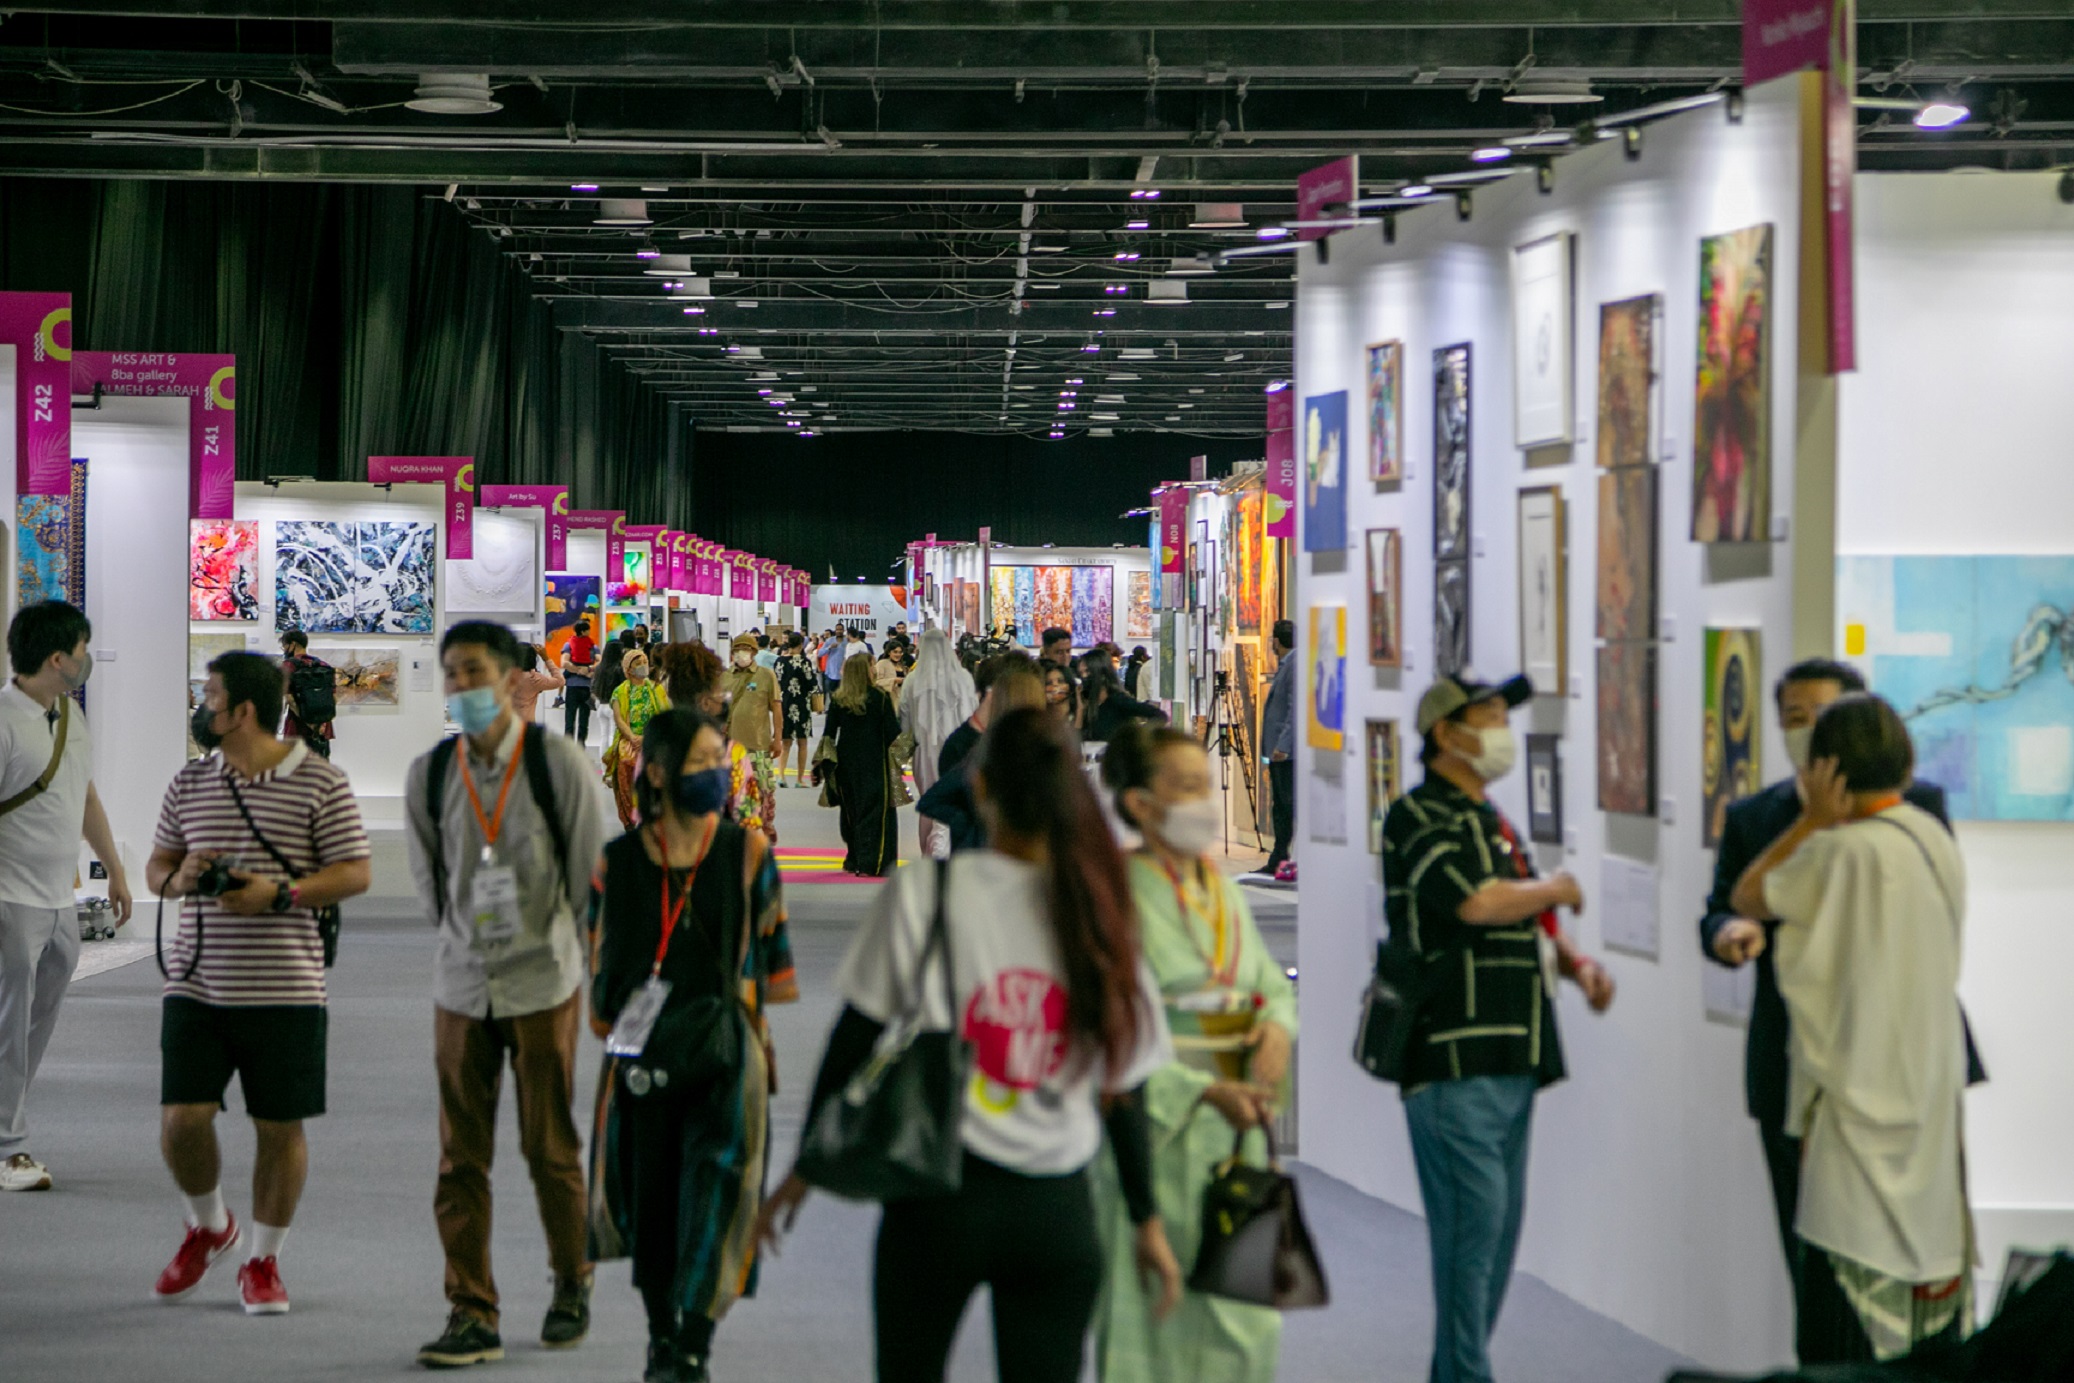 10 AMAZING THINGS TO SEE AND DO AT WORLD ART DUBAI DURING ITS LAST TWO DAYS